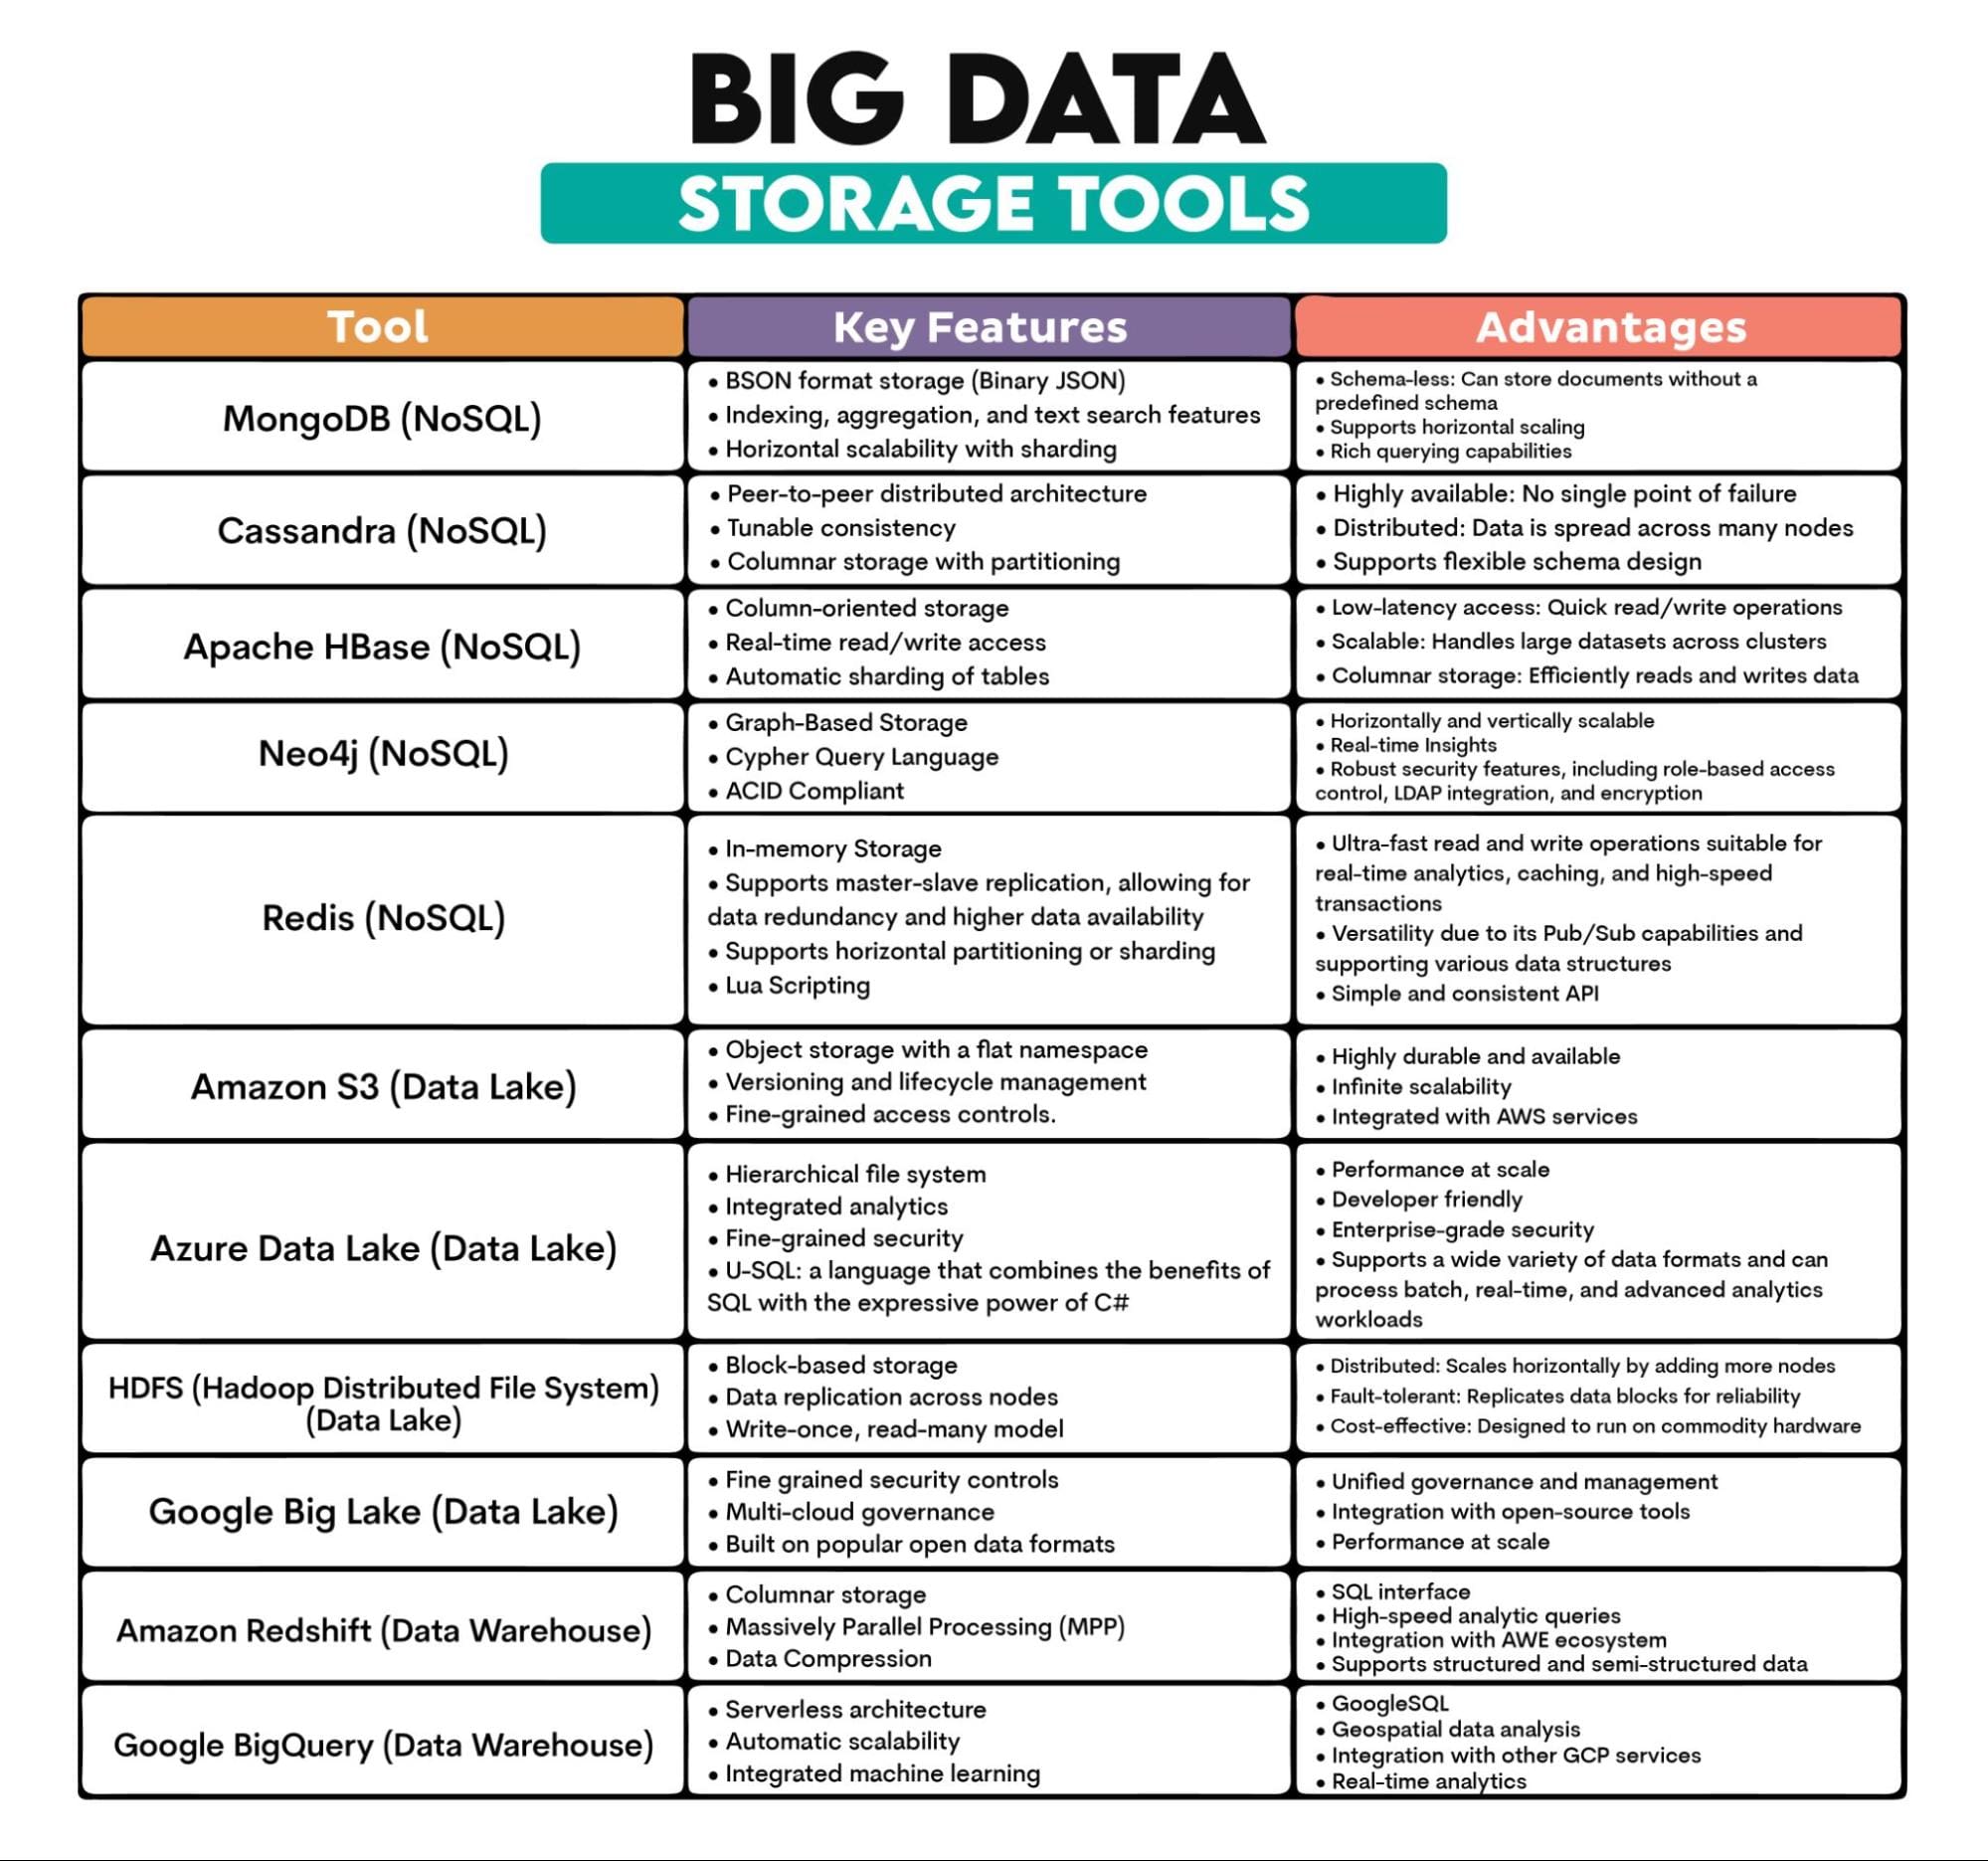 Working with Big Data: Tools and Techniques